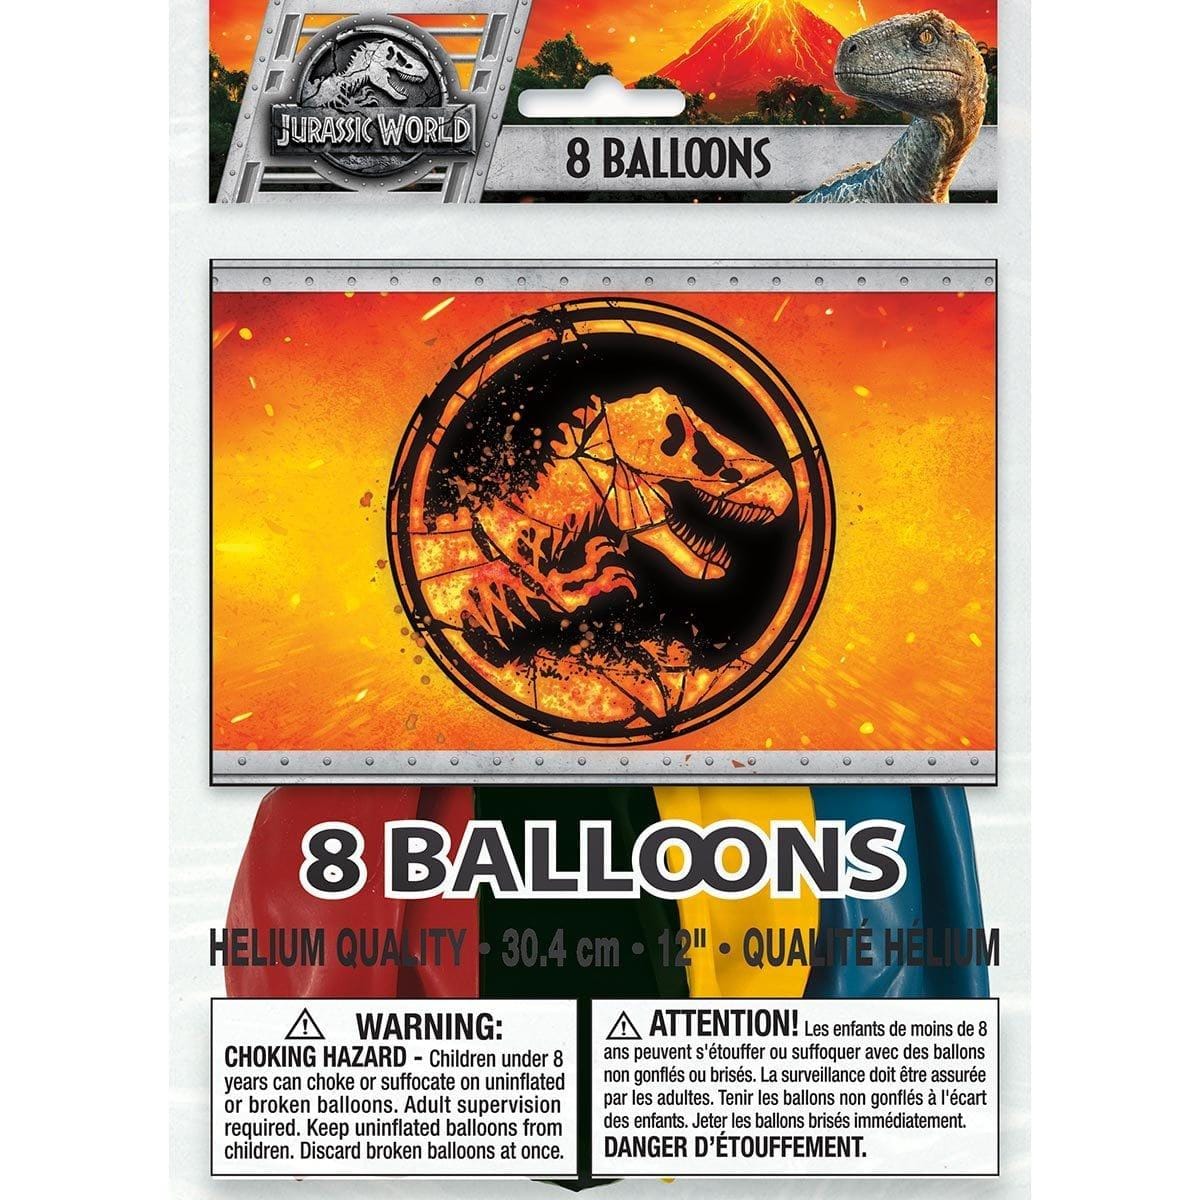 Buy Kids Birthday Jurassic World latex balloons 12 inches, 8 per package sold at Party Expert